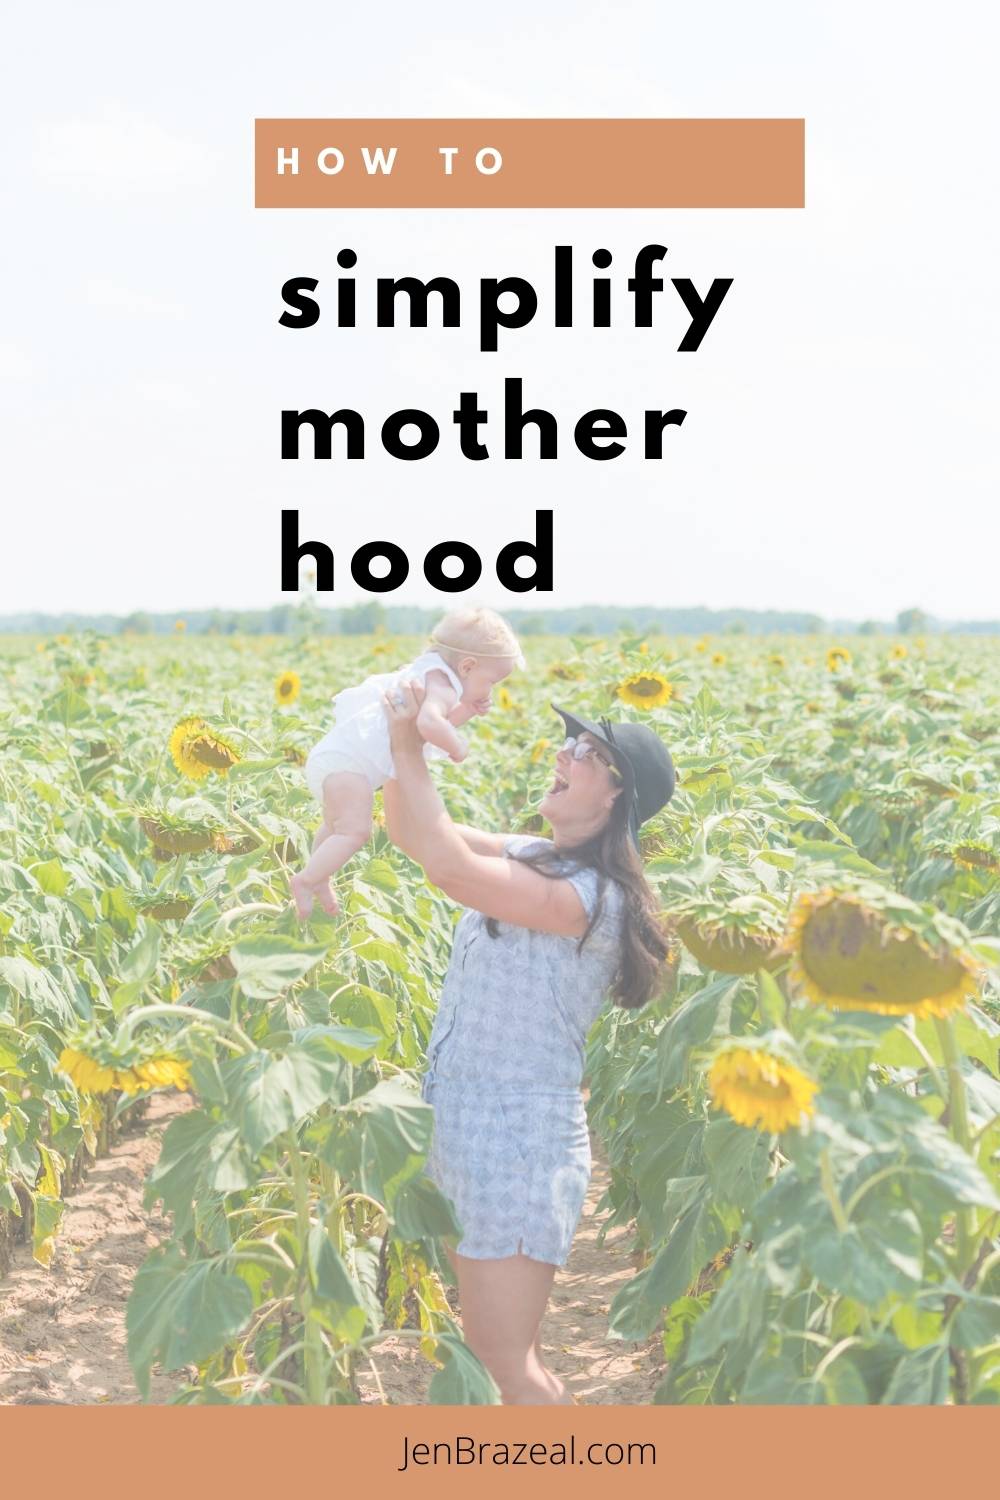 How to Simplify Motherhood | The Unhurried Life Podcast